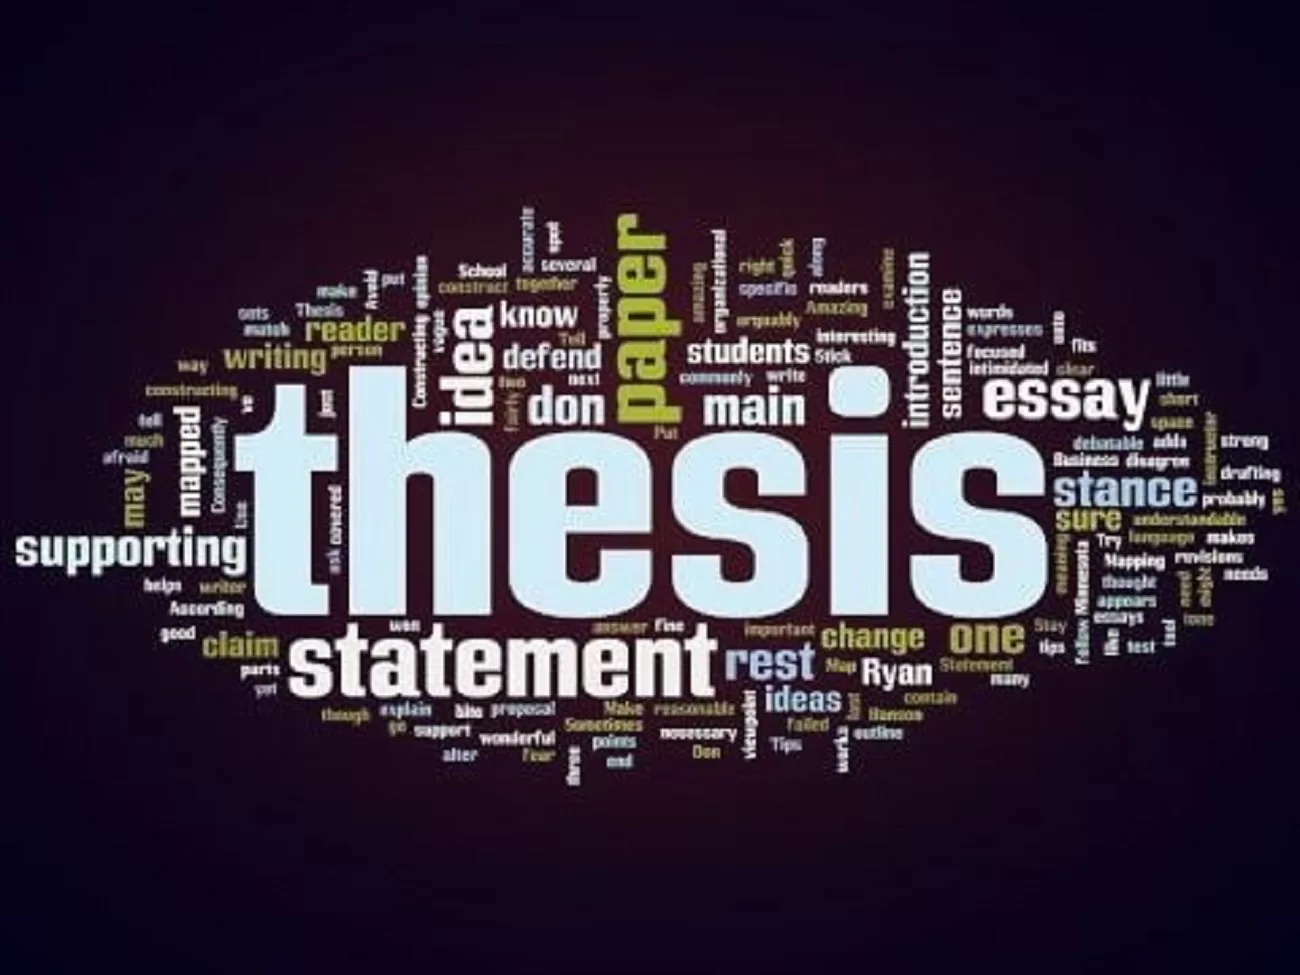 design thesis topic selection guide, design thesis topic,